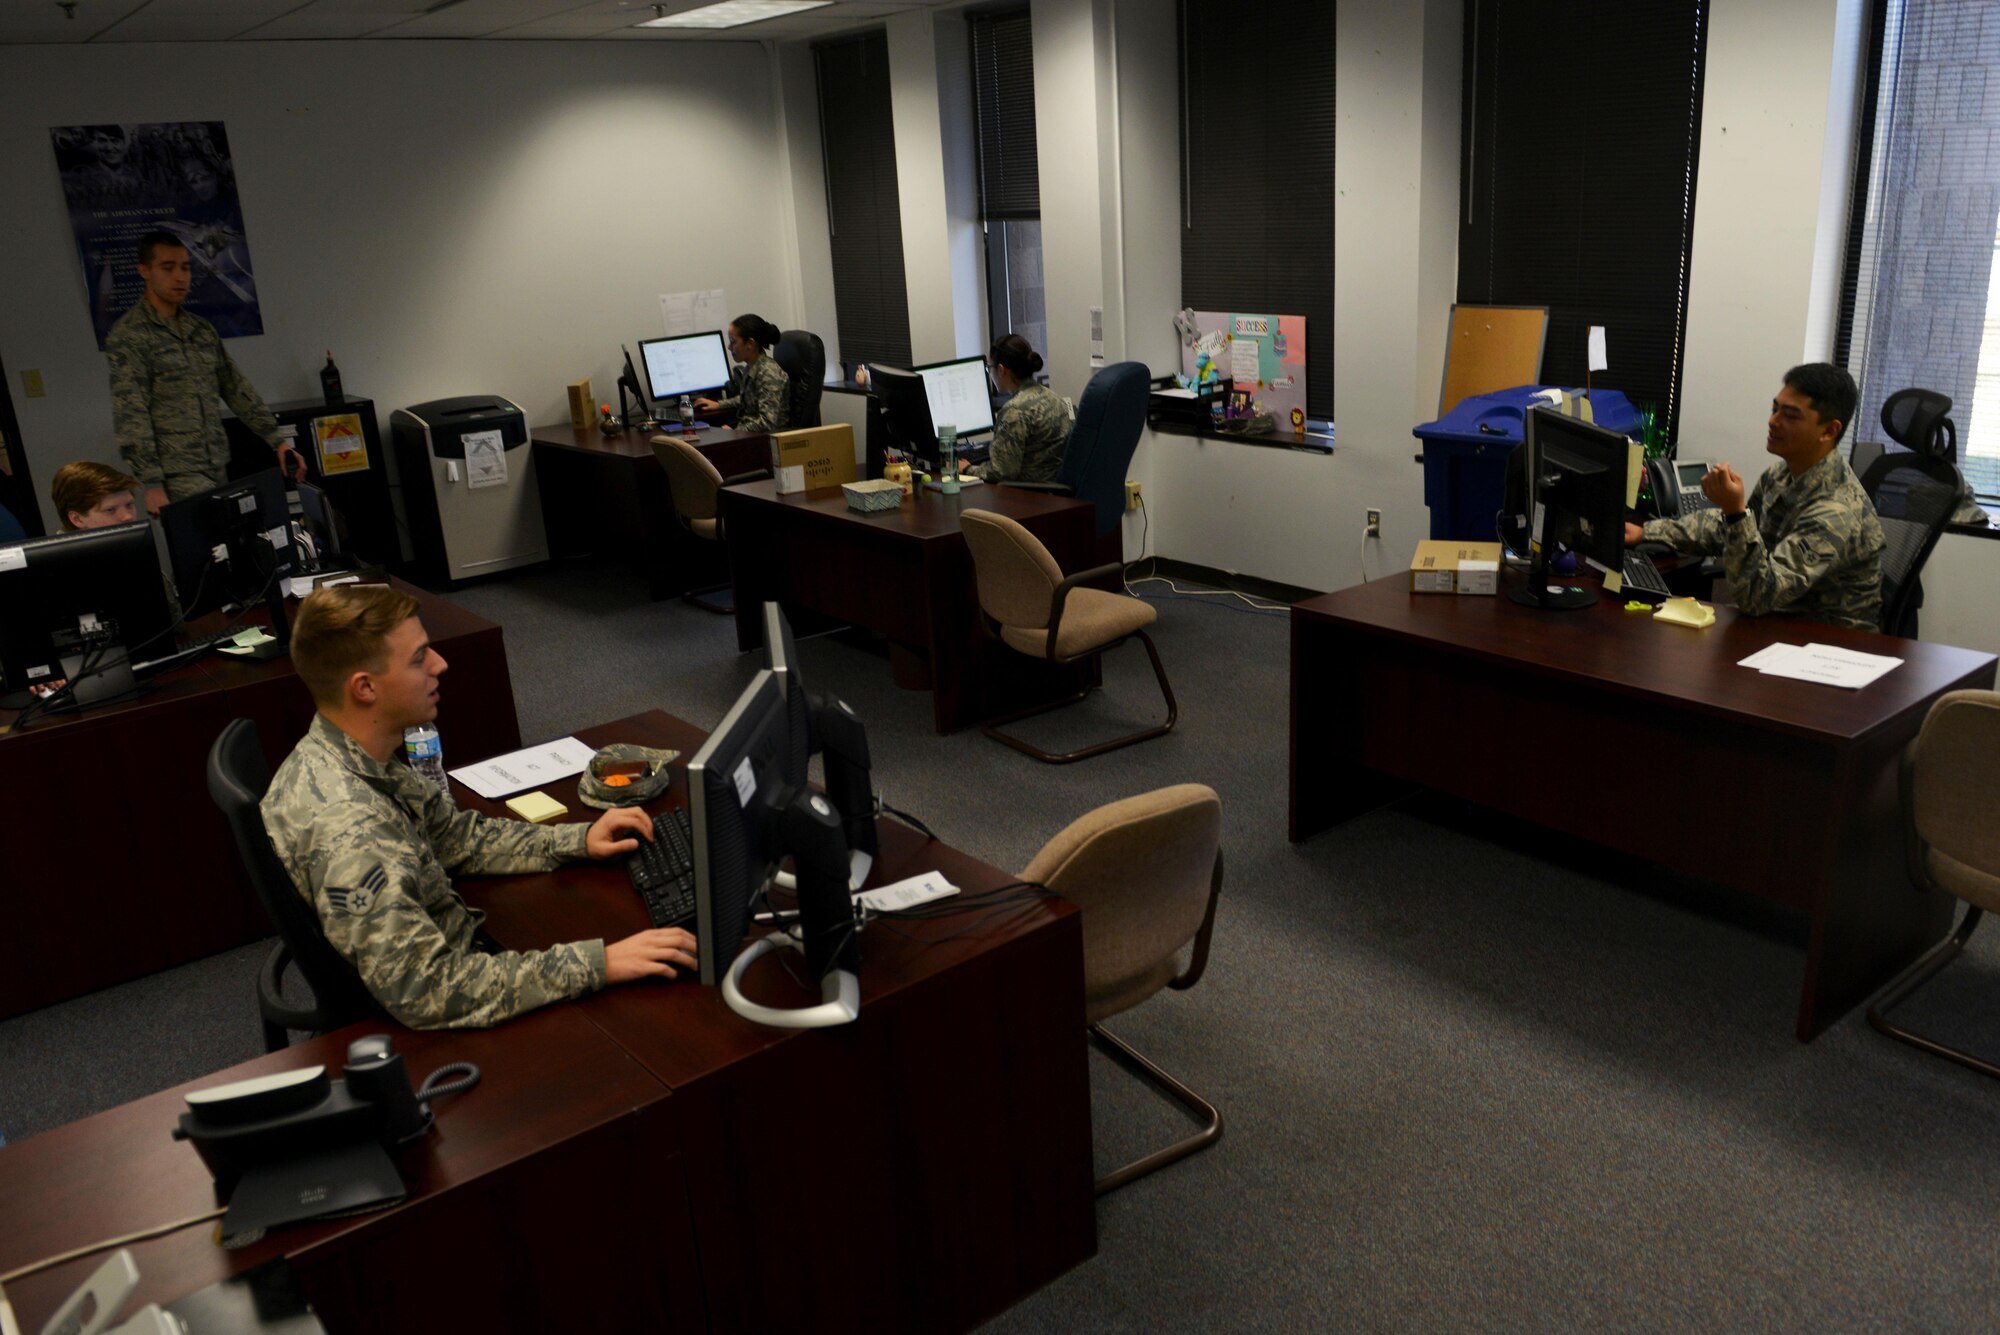 U.S. Airmen assigned to the 20th Force Support Squadron evaluations office work on enlisted performance report (EPR) packages at Shaw Air Force Base, S.C., March 20, 2017. The evaluations Airmen are responsible for reviewing and submitting EPRs to the Air Force Personnel Center. (U.S. Air Force photo by Airman 1st Class Destinee Sweeney)